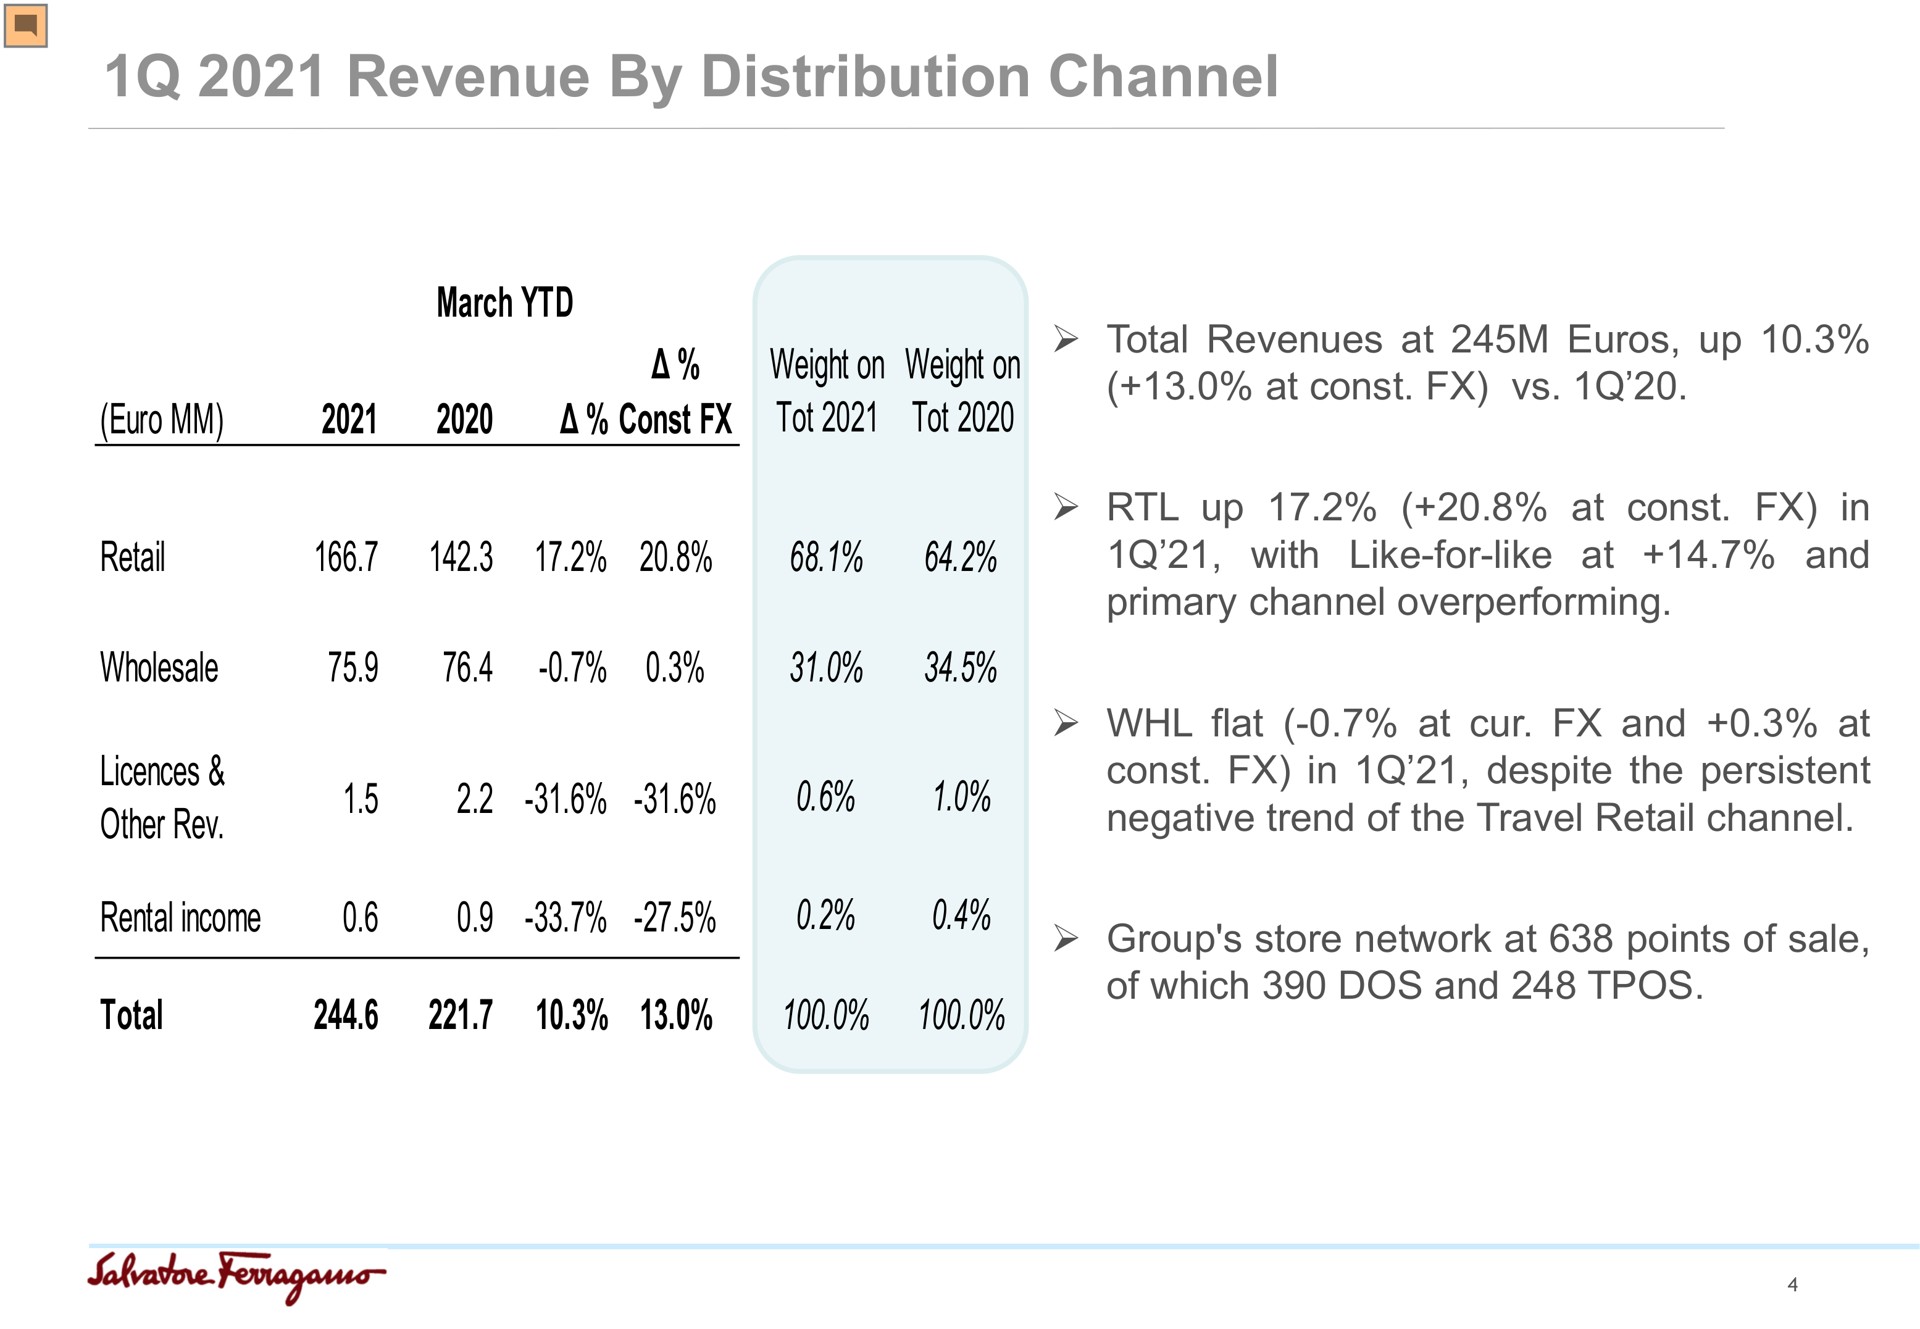 revenue by distribution channel march weight on tot weight on tot total revenues at up at retail wholesale other rev rental income total up at in with like for like at and primary channel flat at cur and at in despite the persistent negative trend of the travel retail channel group store network at points of sale of which dos and | Salvatore Ferragamo